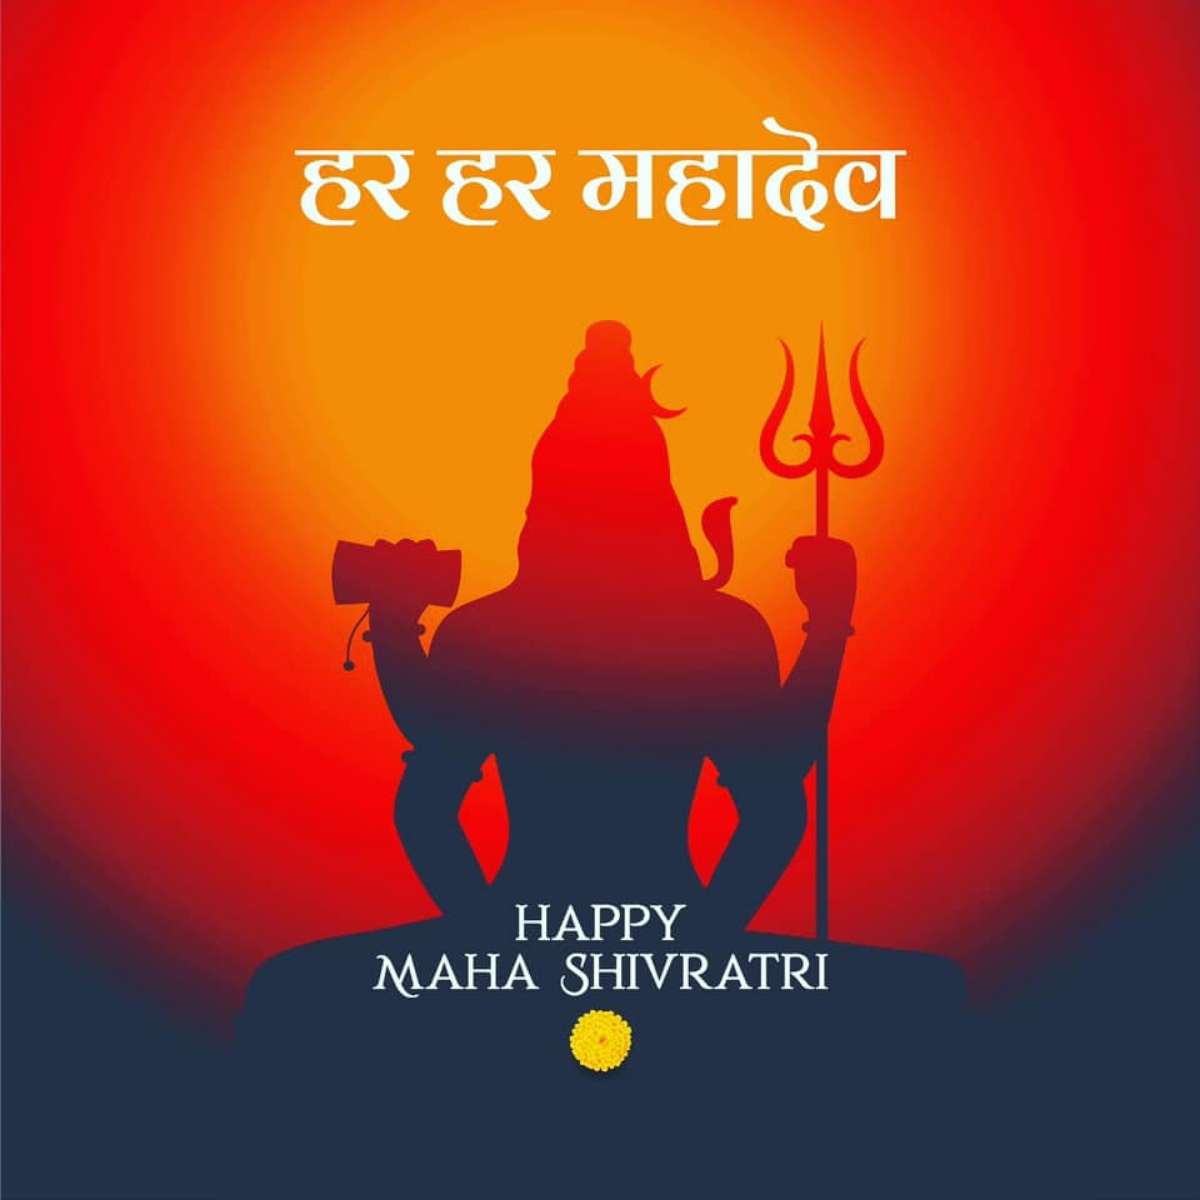 Happy Maha Shivratri 2022 Wishes Images, Status, Quotes, HD Wallpapers,  SMS, GIF Pics, Messages, Photos, Greetings Download